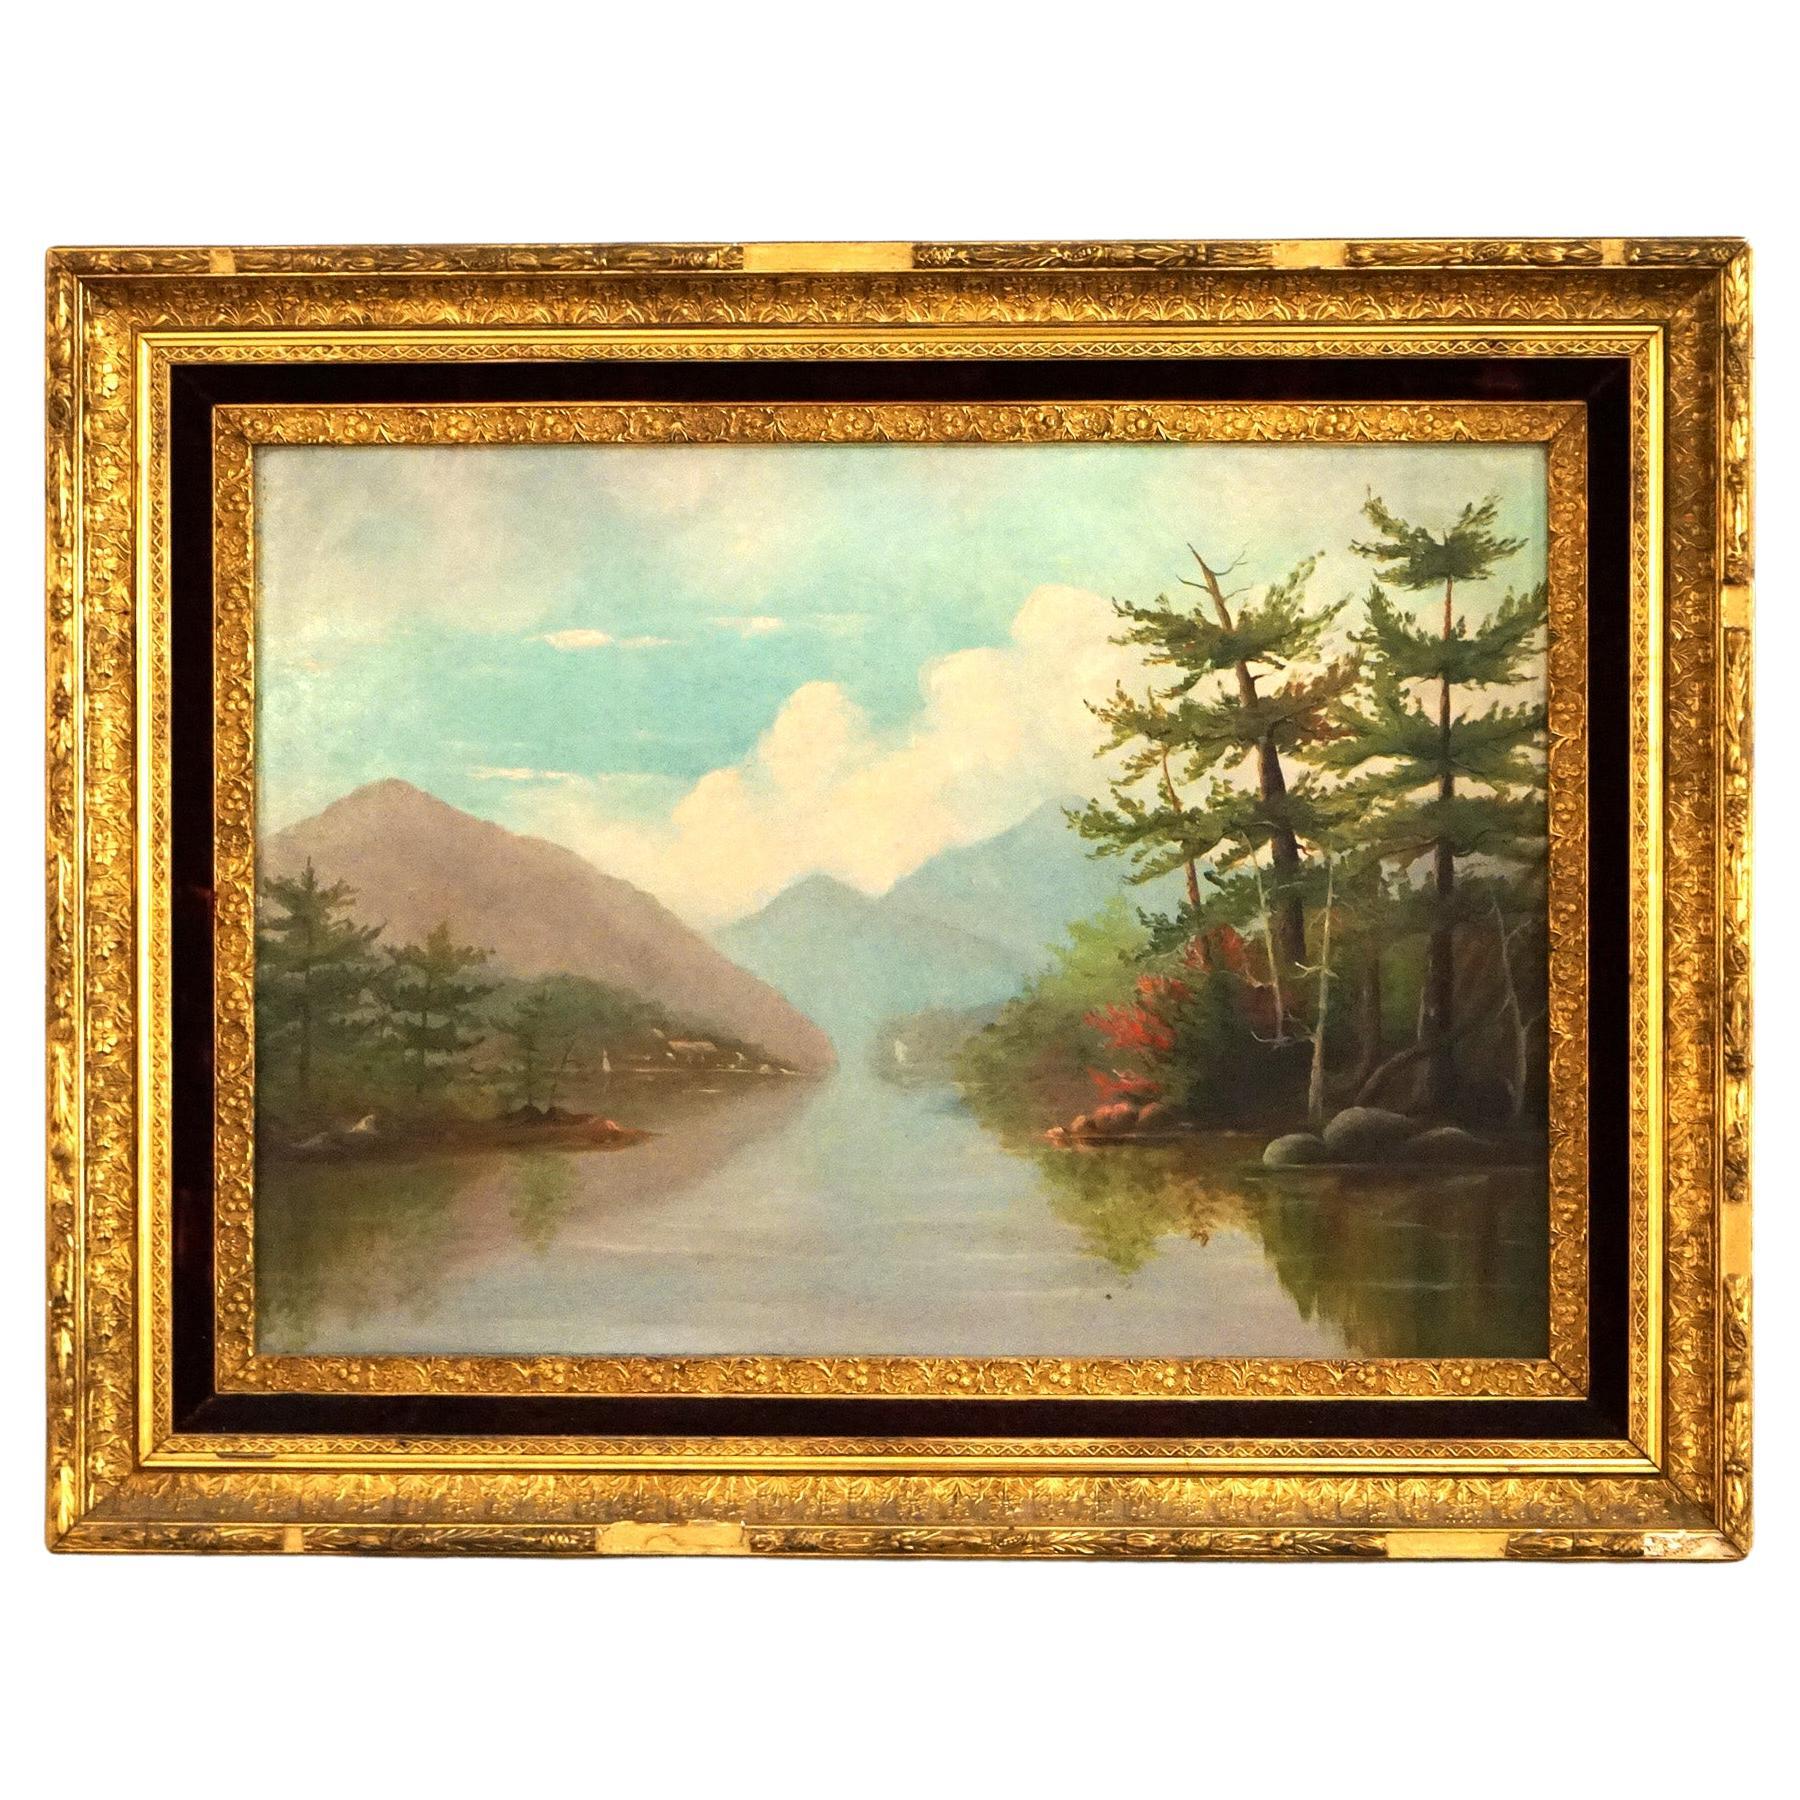 Antique Oil on Canvas Landscape Painting of a Mountain Lake C1890 For Sale